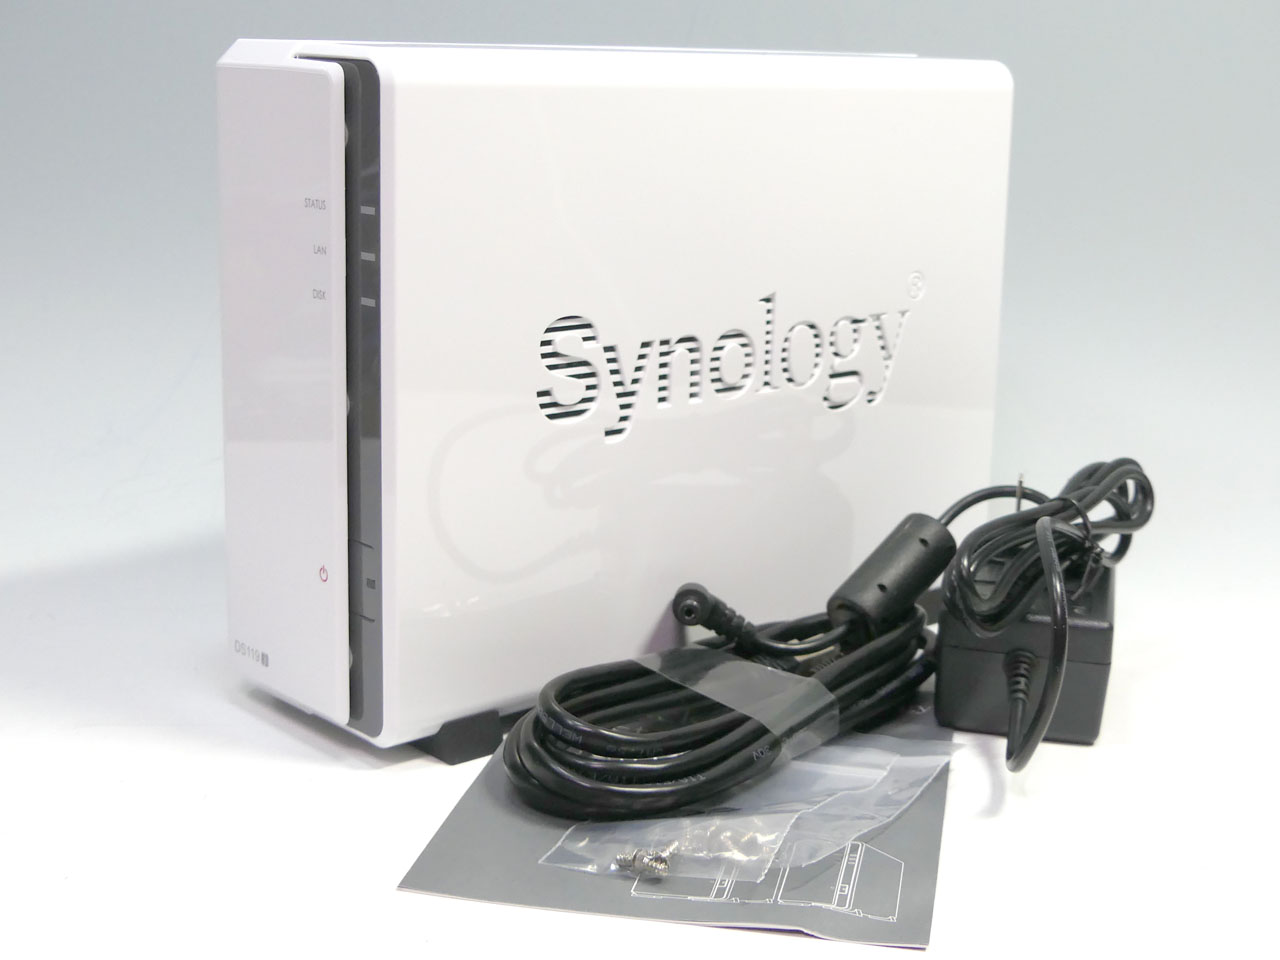 NAS Synology DS119j HDD付属synology